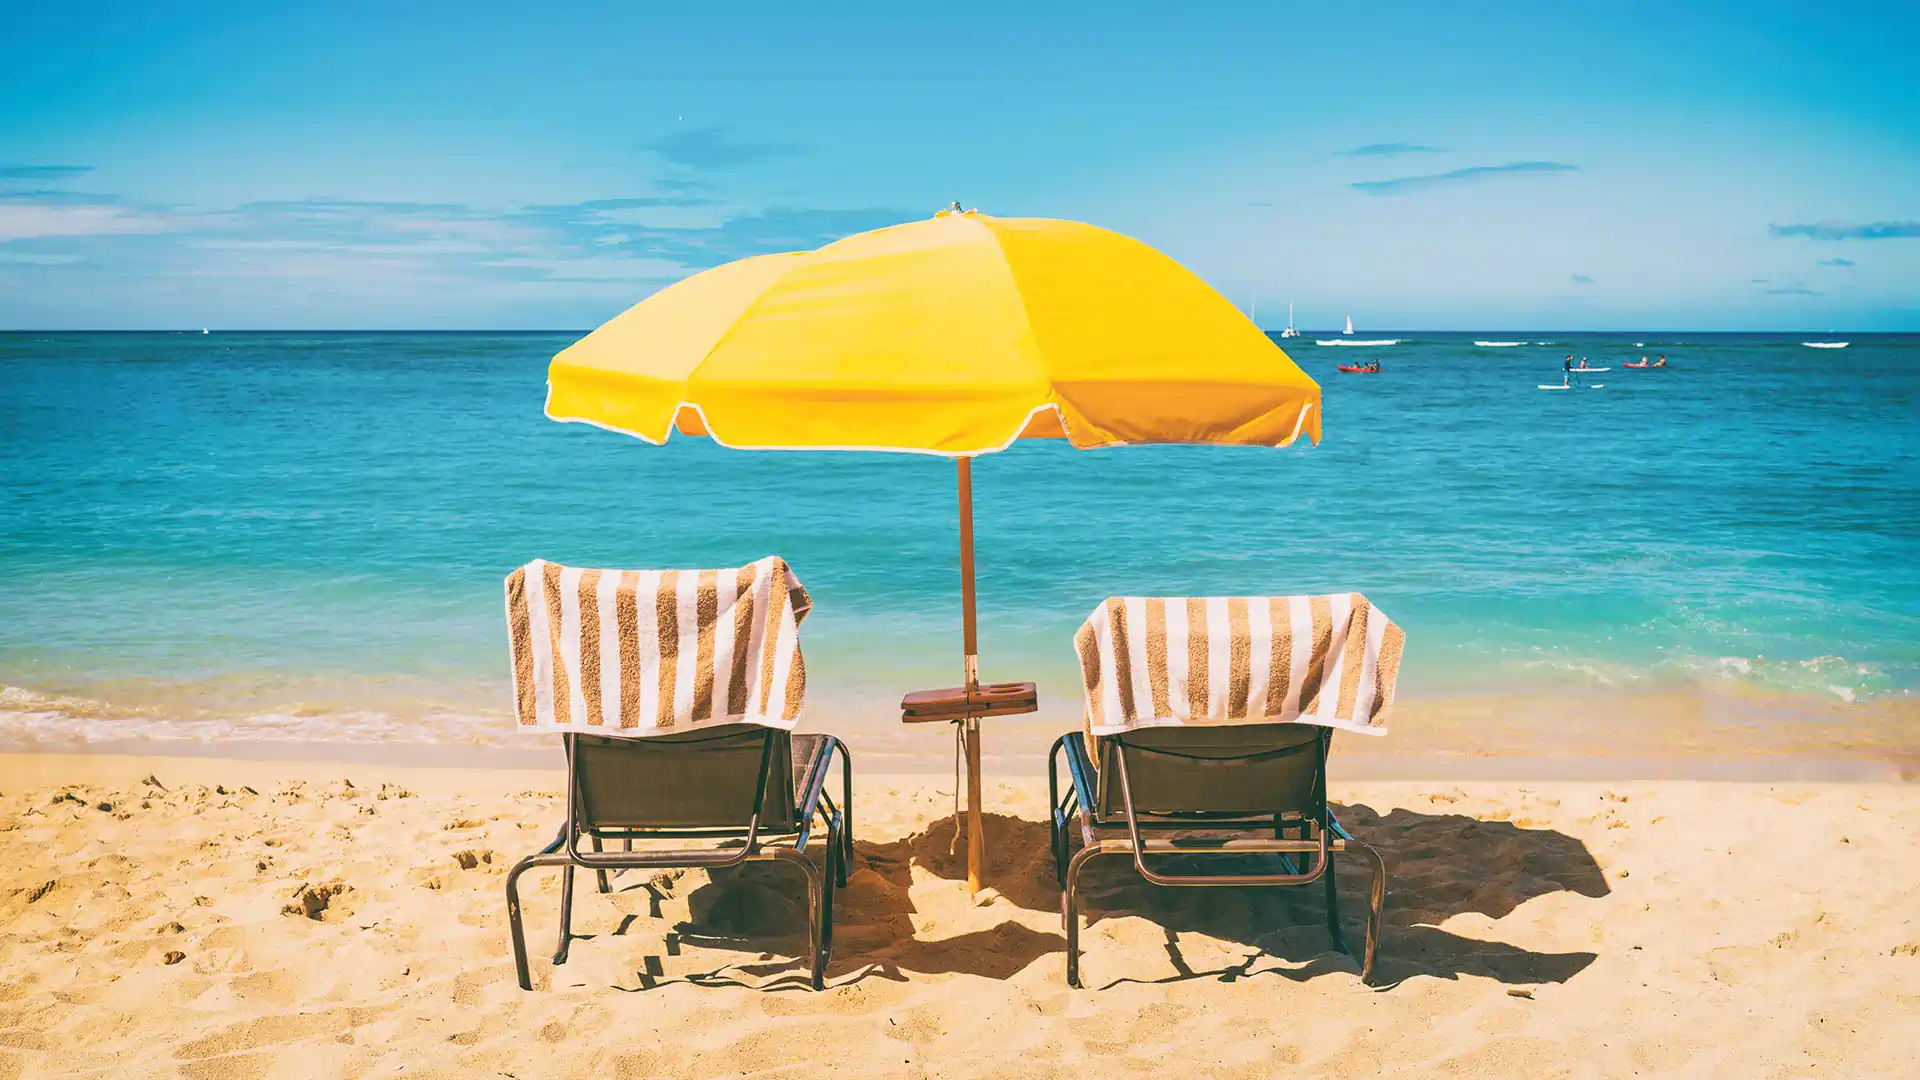 two beach chairs with towels under a yellow umbrella on a beach in a sunny vacation destination